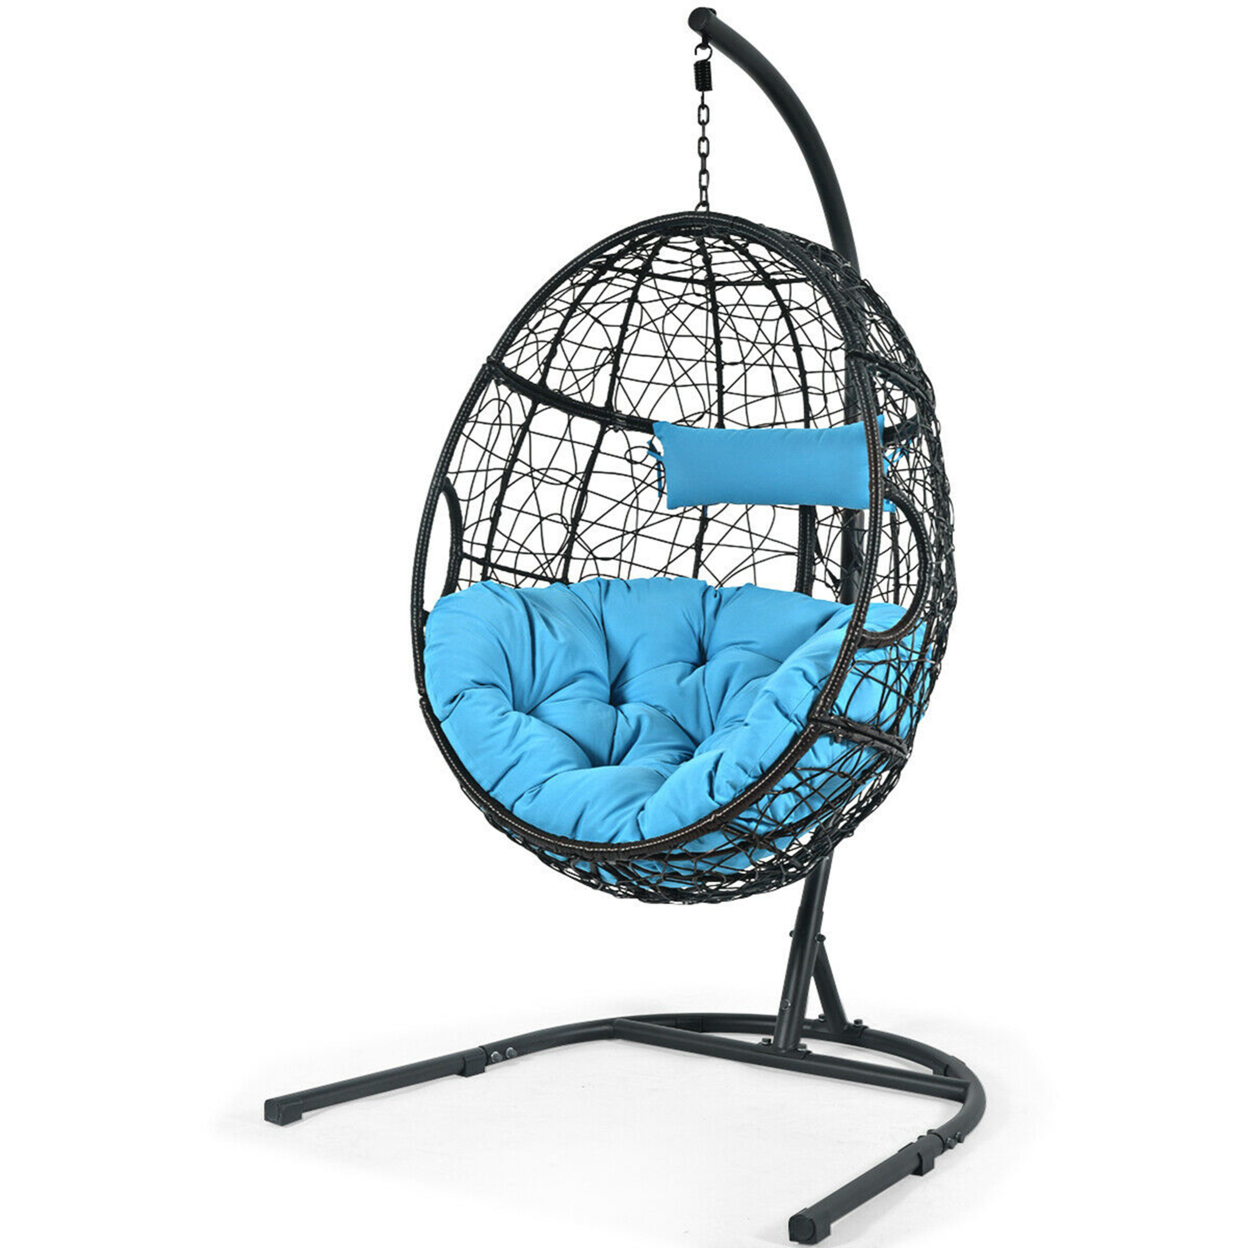 Hanging Hammock Chair Egg Swing Chair W/ Blue Cushion Pillow Stand